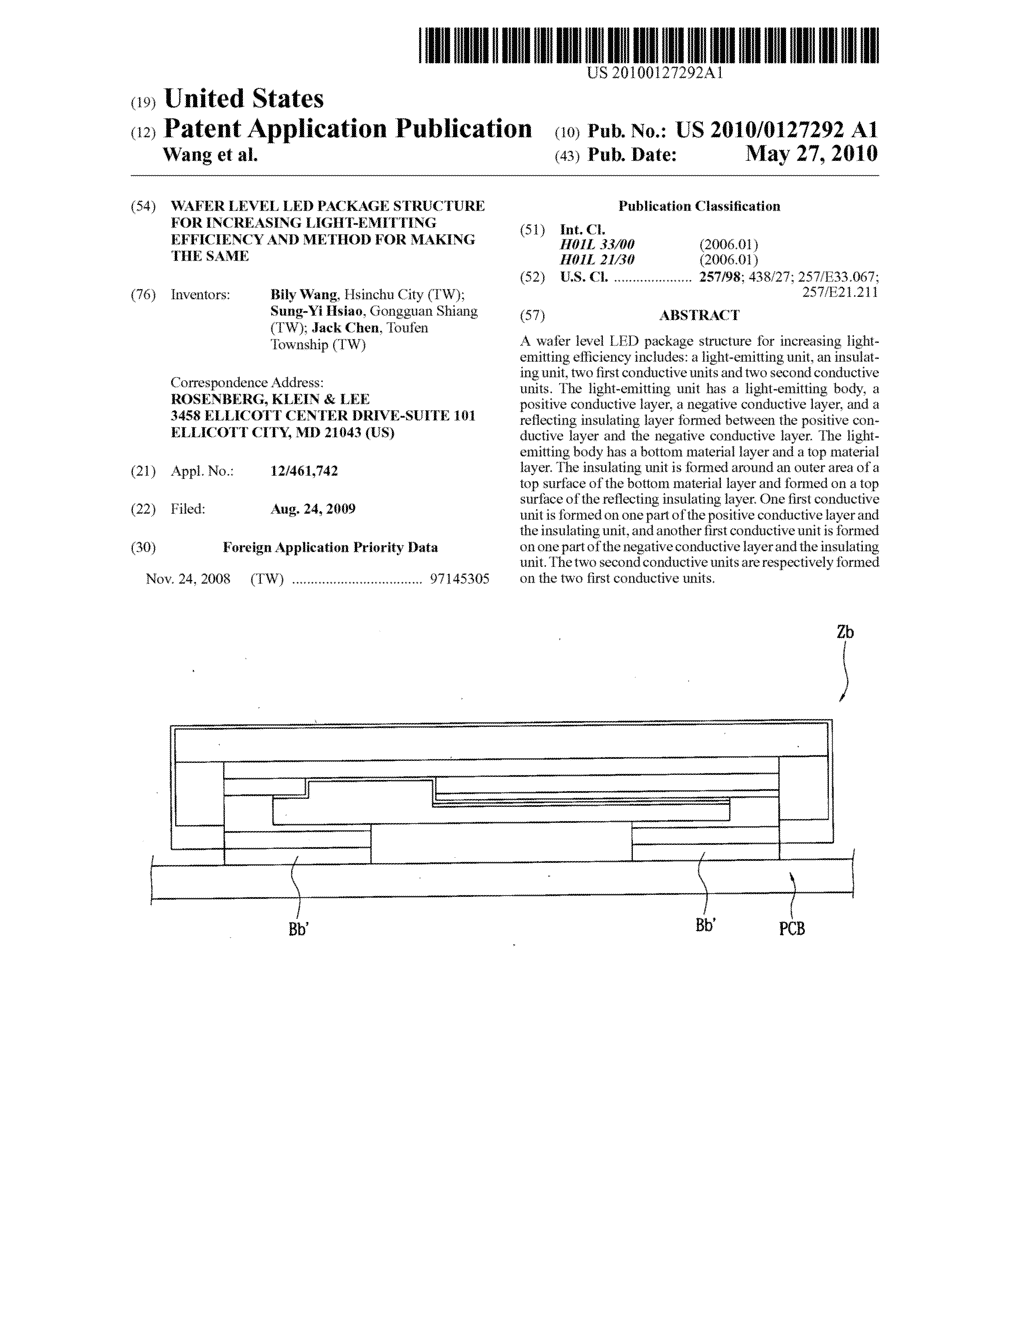 Wafer level led package structure for increasing light-emitting efficiency and method for making the same - diagram, schematic, and image 01